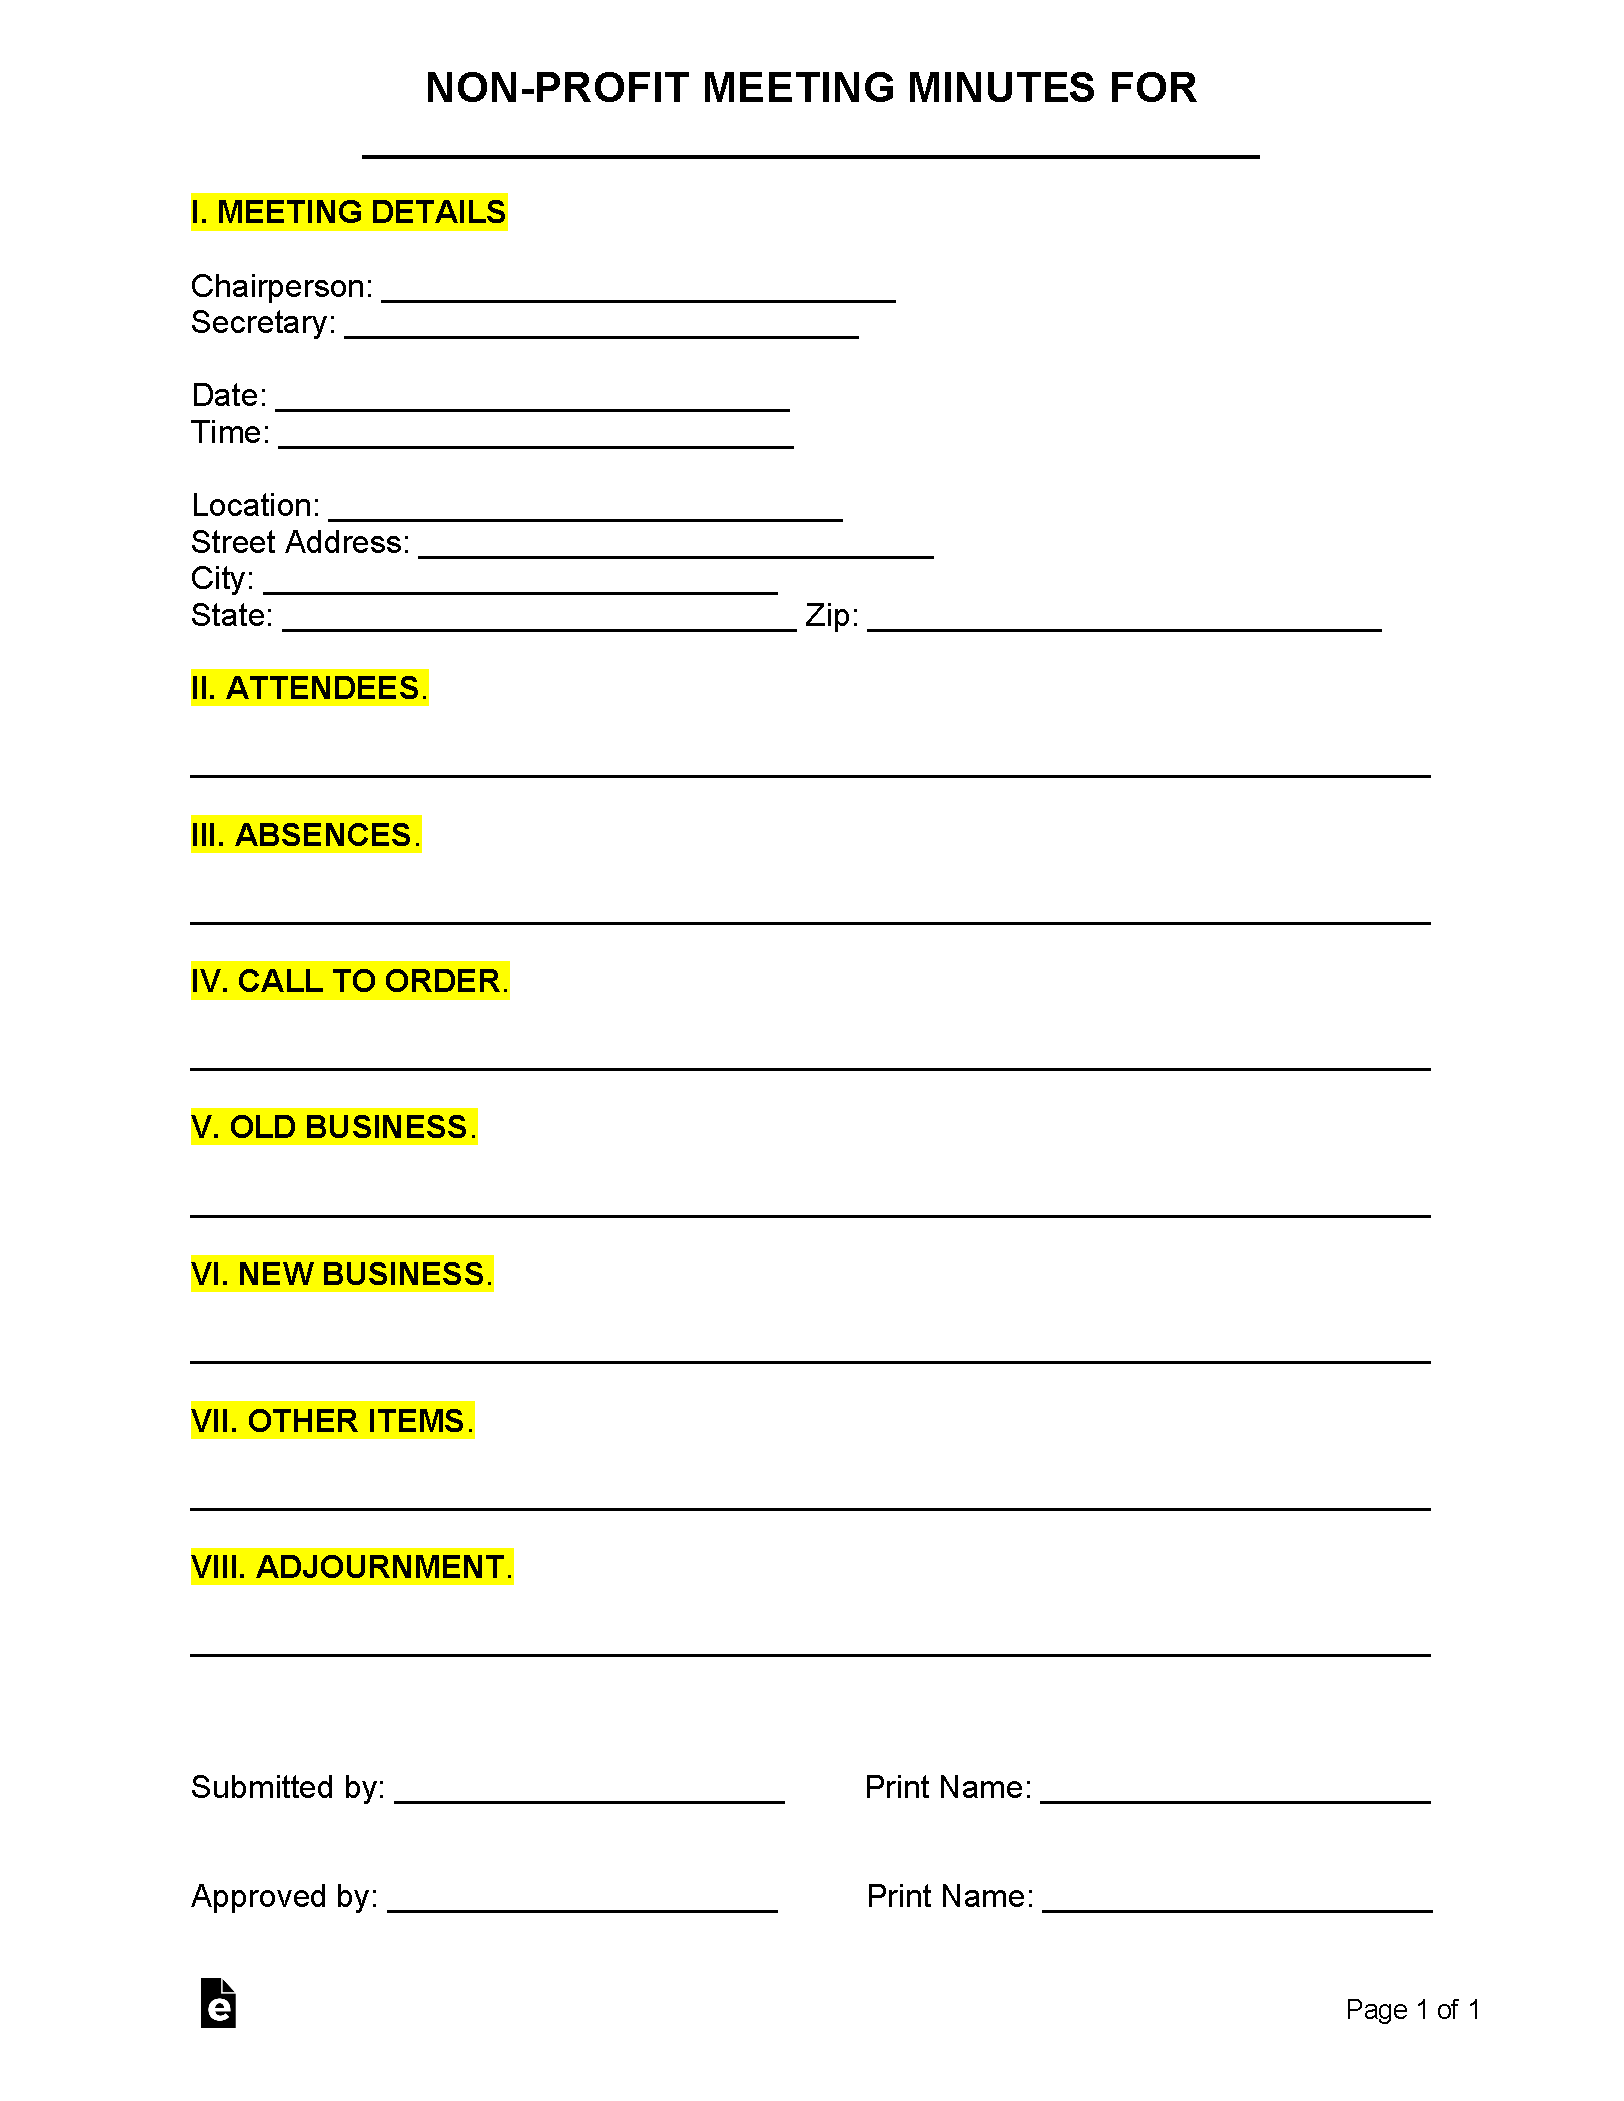 free-non-profit-meeting-minutes-template-sample-pdf-word-eforms